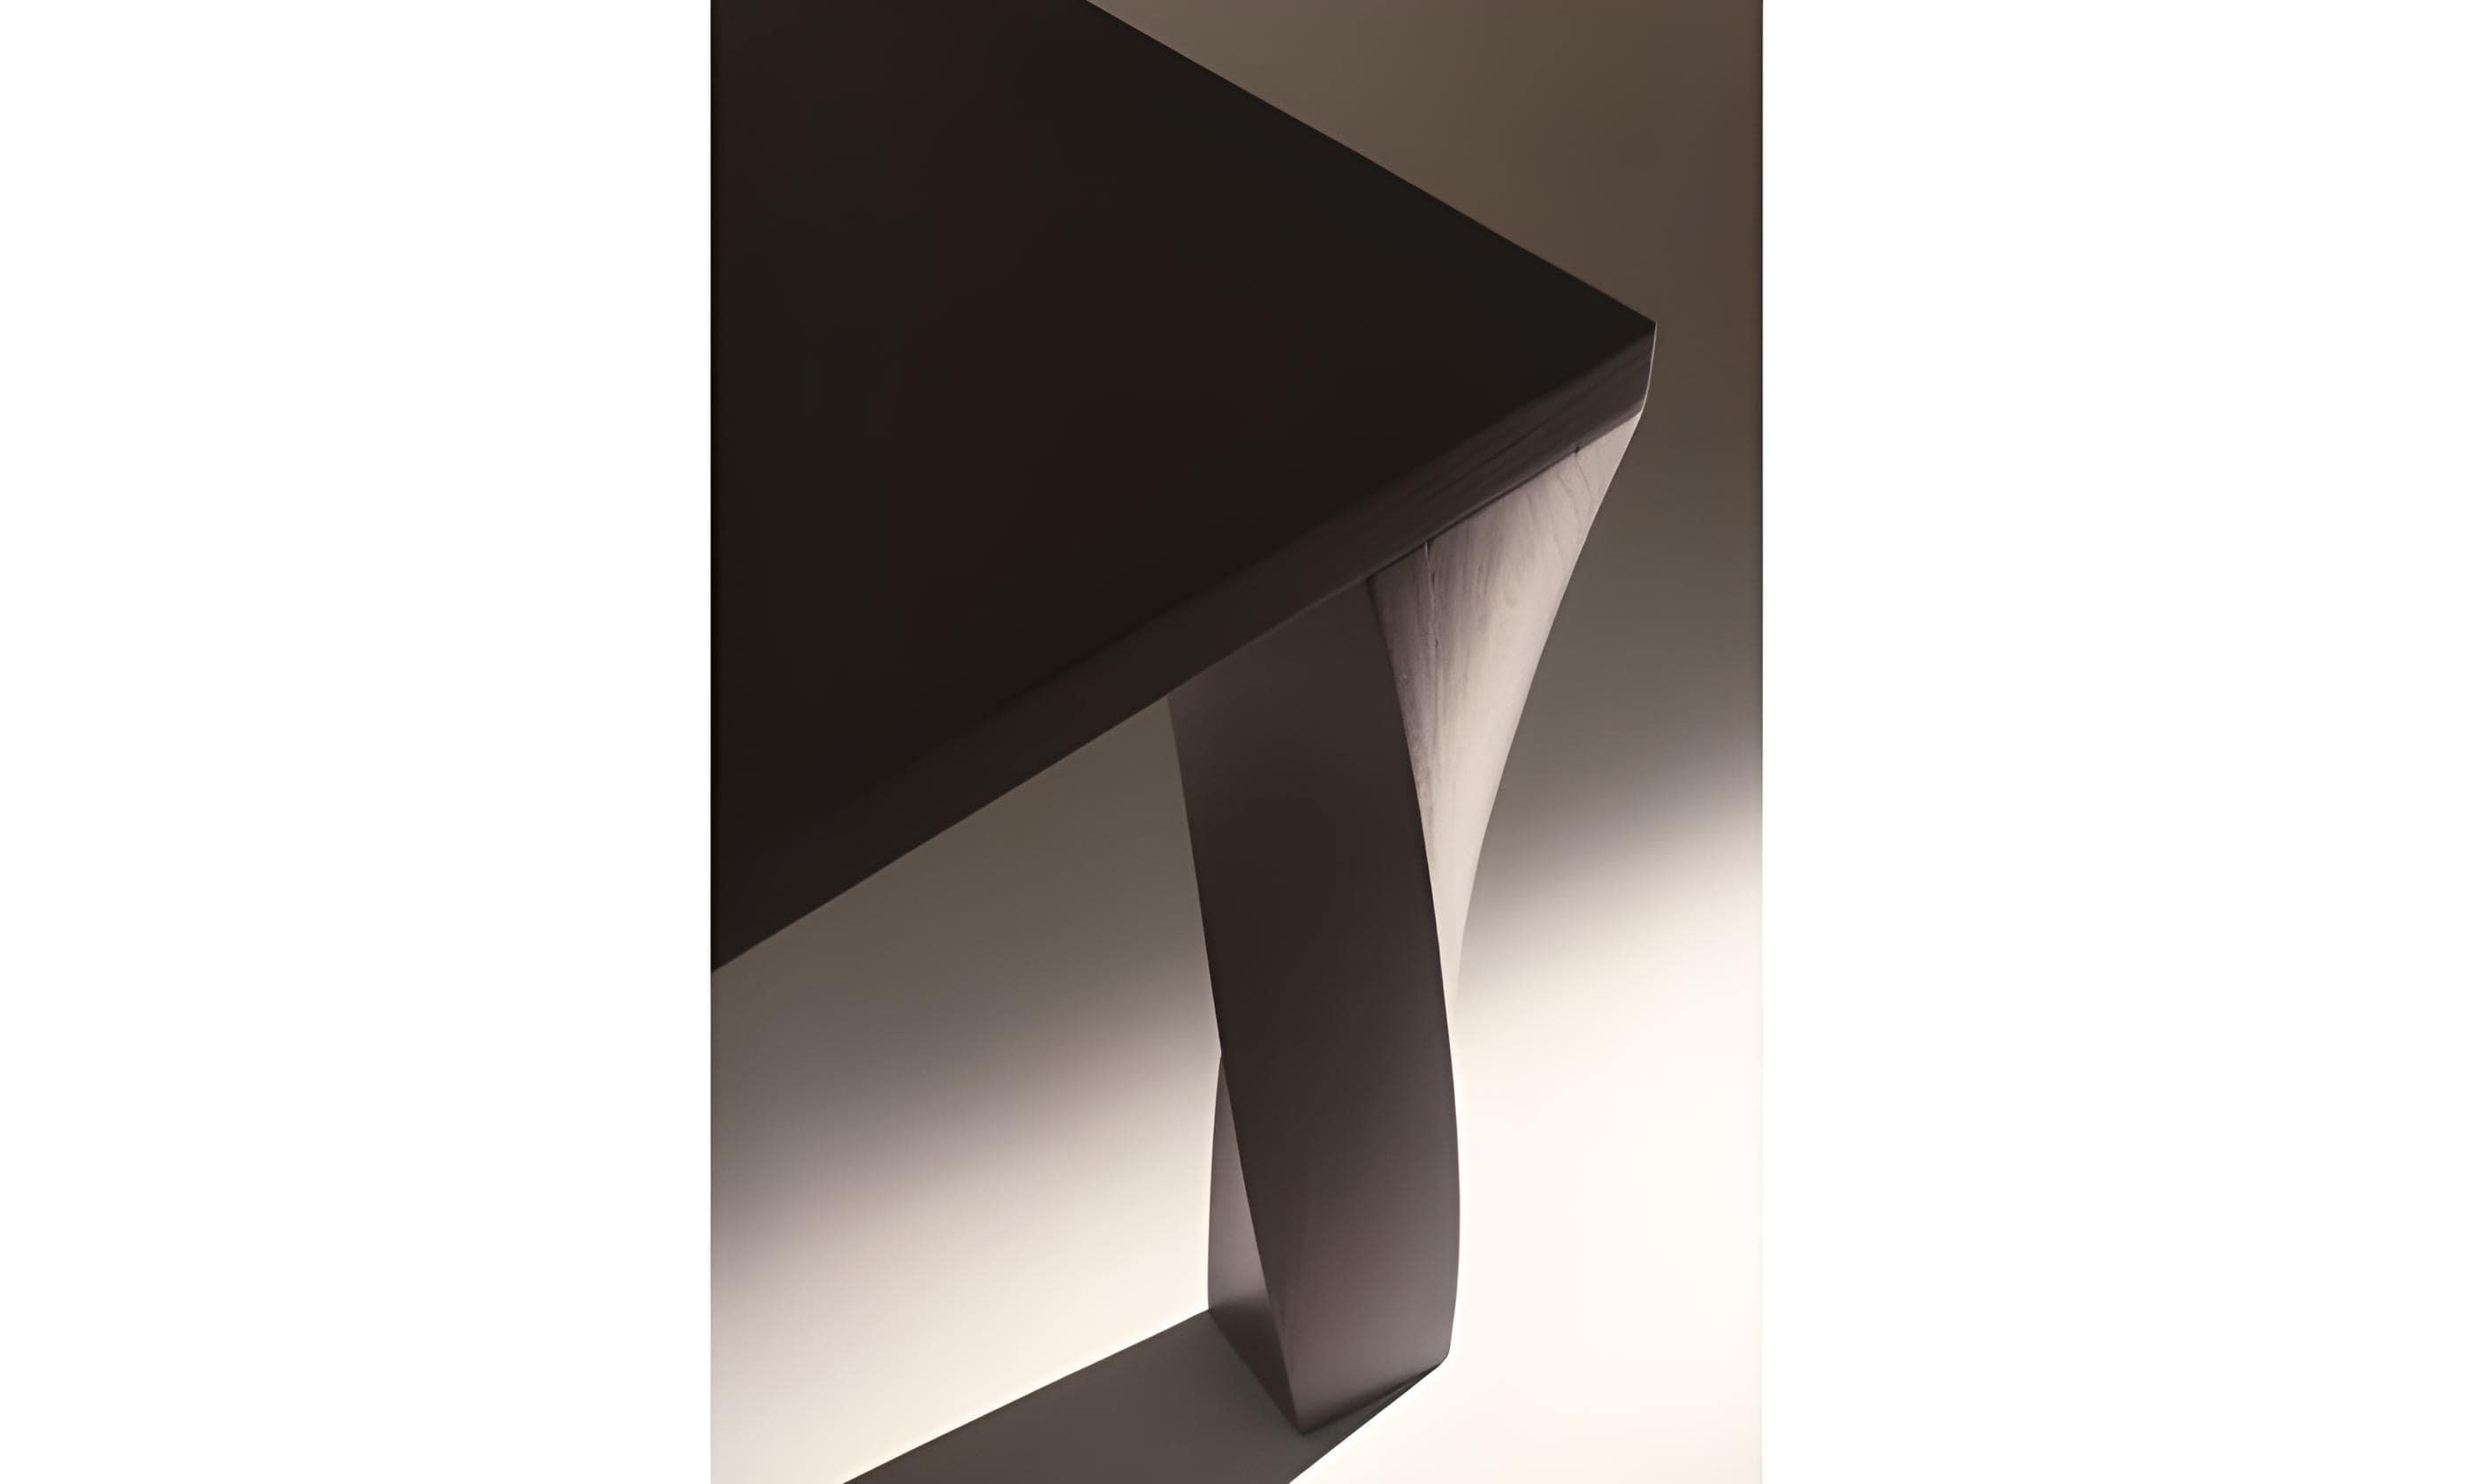 Gira che ti rigira is a rectangular dining table, crafted from solid elm wood stained in matt black. This exceptional piece showcases gracefully twisted legs, adding a touch of whimsy and artistry to its design, while also ensuring stability and